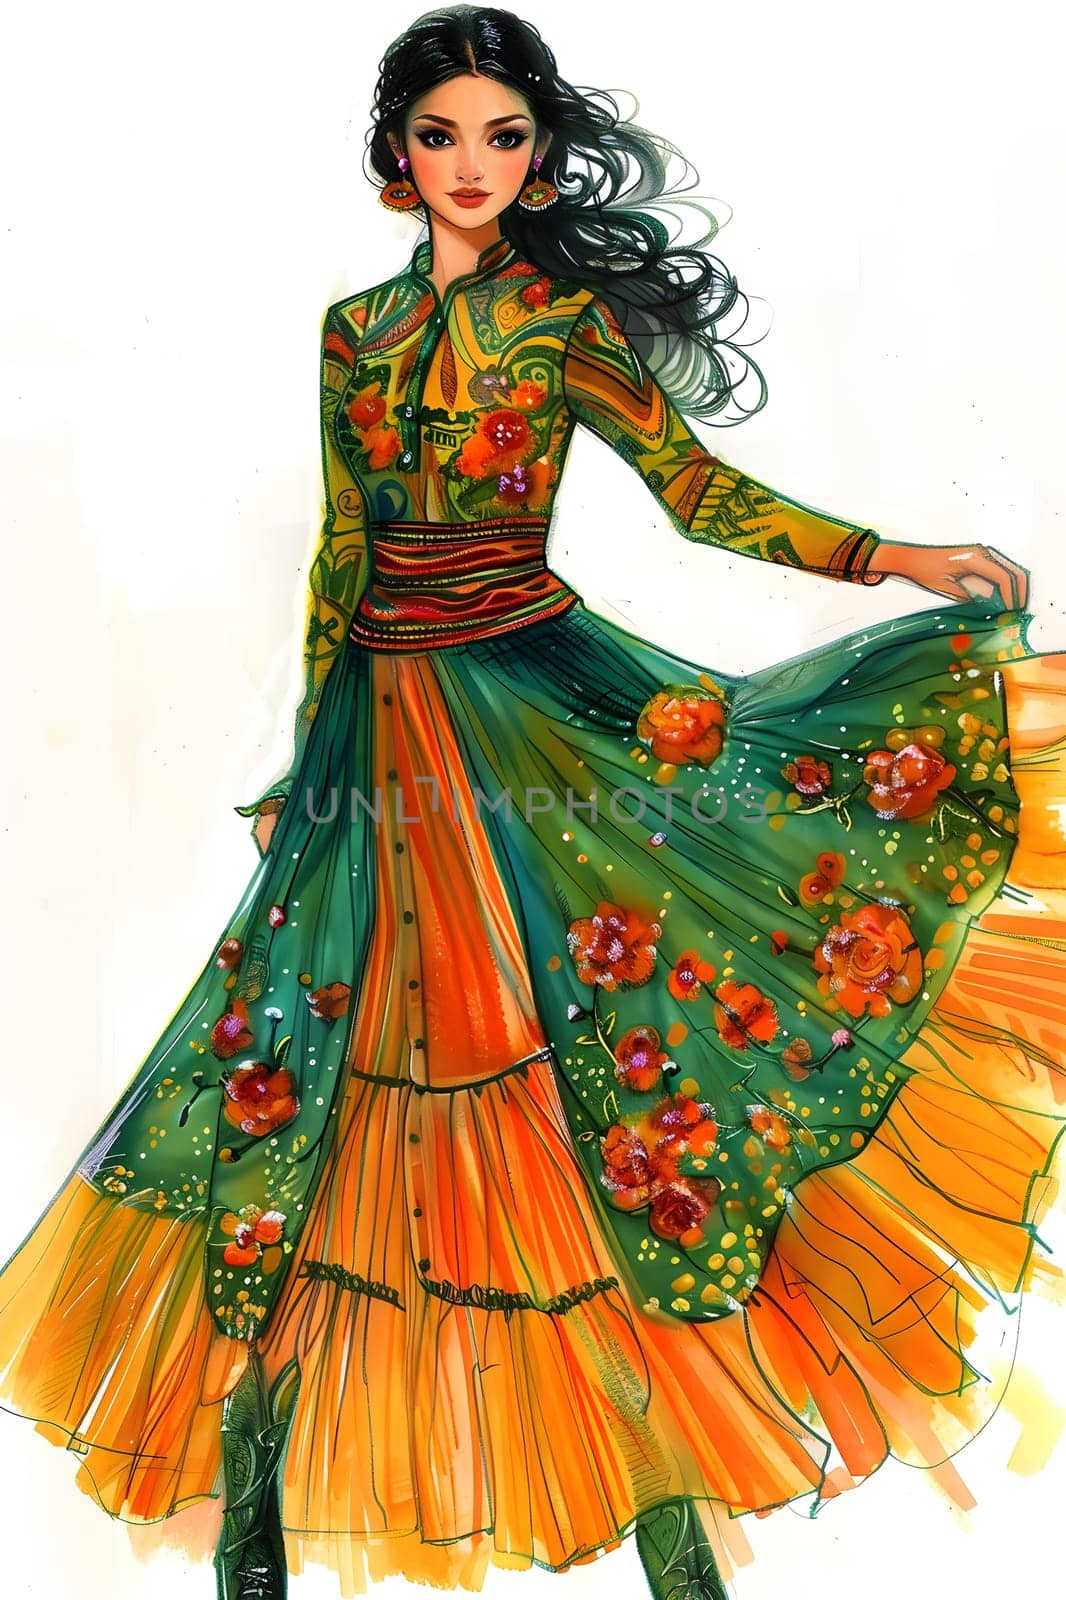 A fashion design with colorful embellishments in an orange and green day dress by Nadtochiy